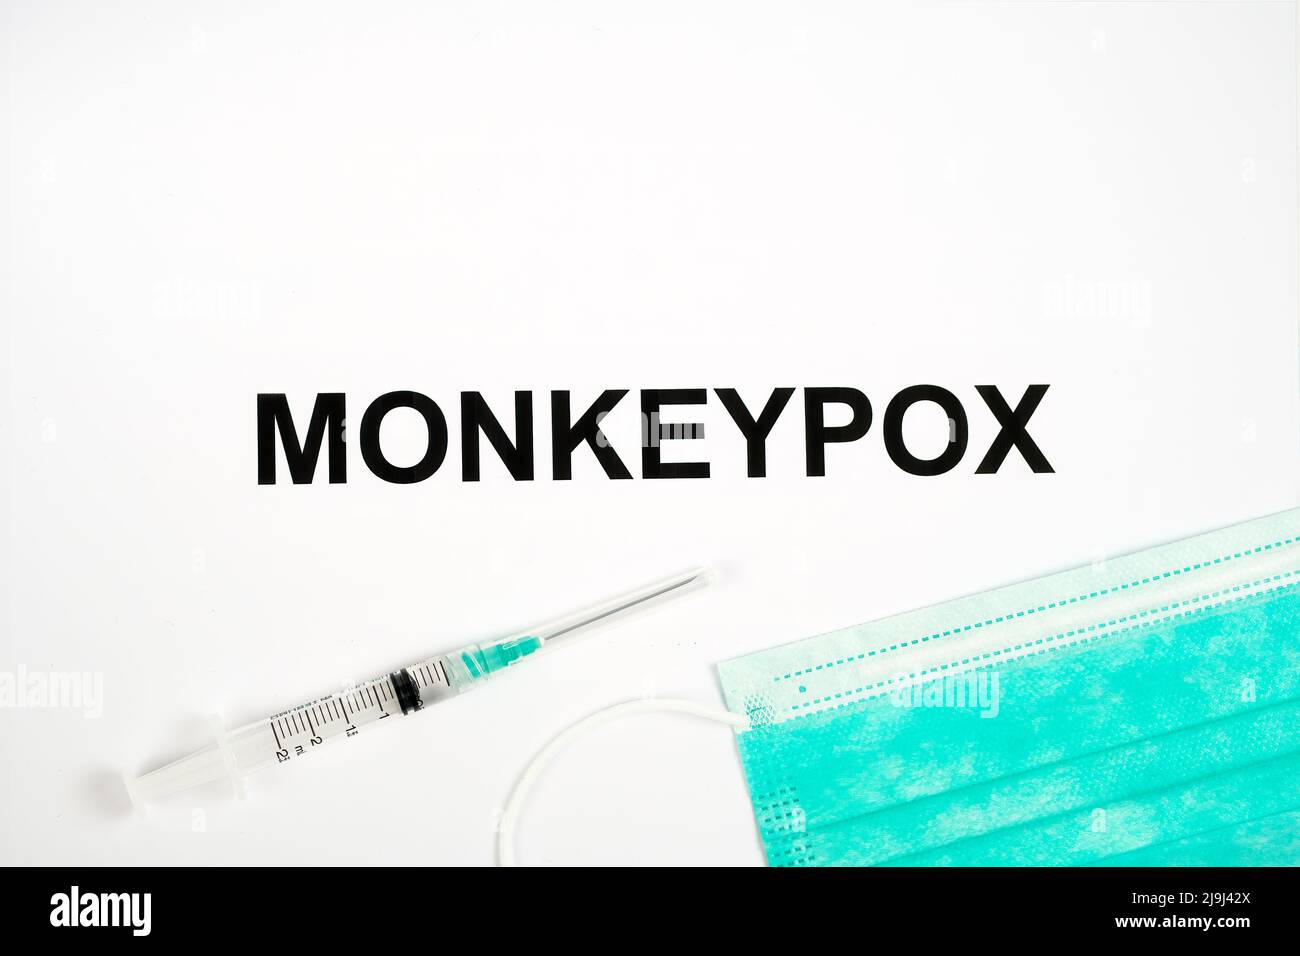 MONKEYPOX infection name seen printed on paper with syringe and medical mask. Concept. Stock Photo